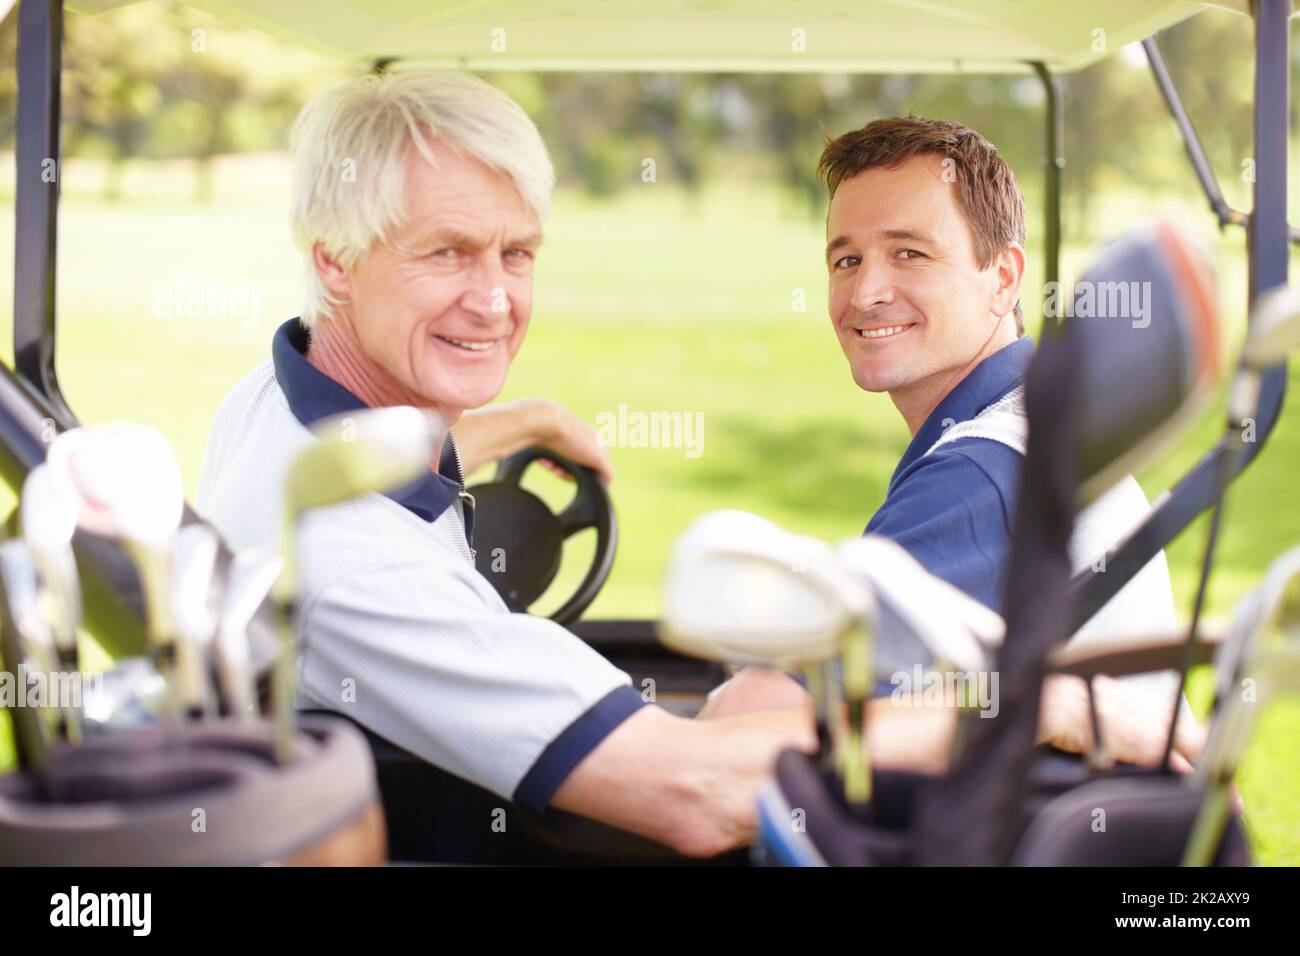 Golfing buddies. Golfing companions on the golf course in a golf cart. Stock Photo